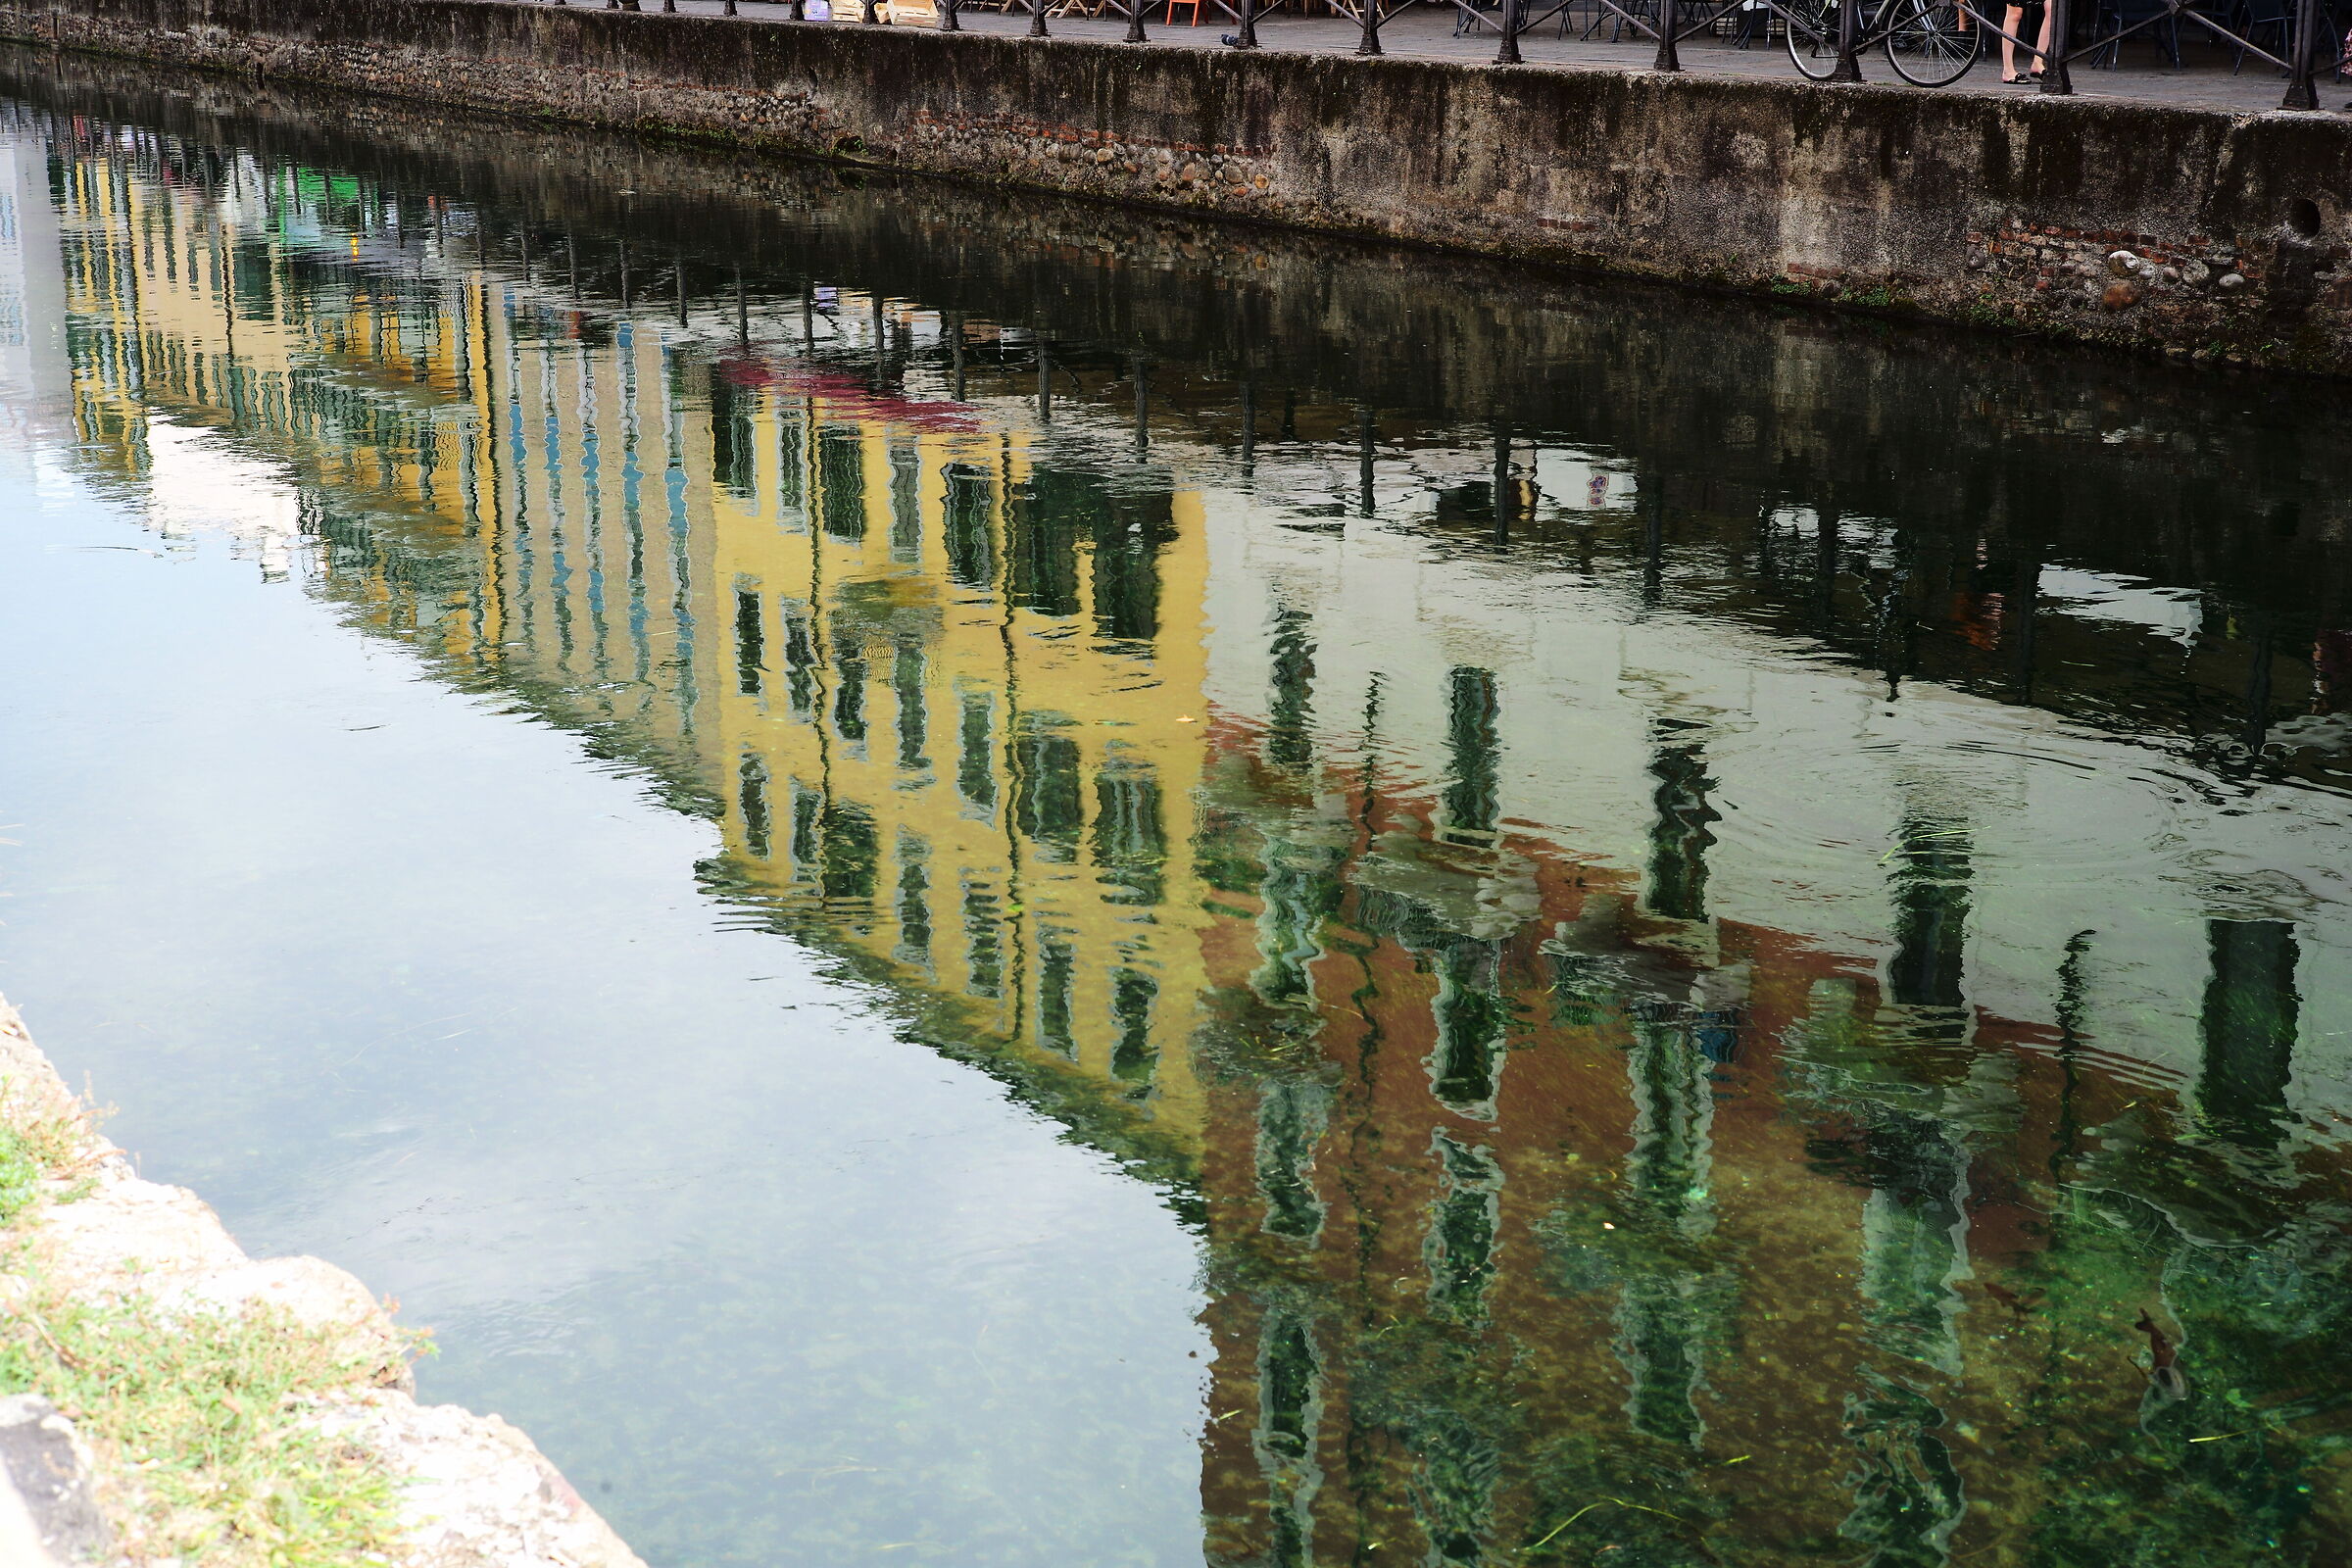 Reflection on the Naviglio...